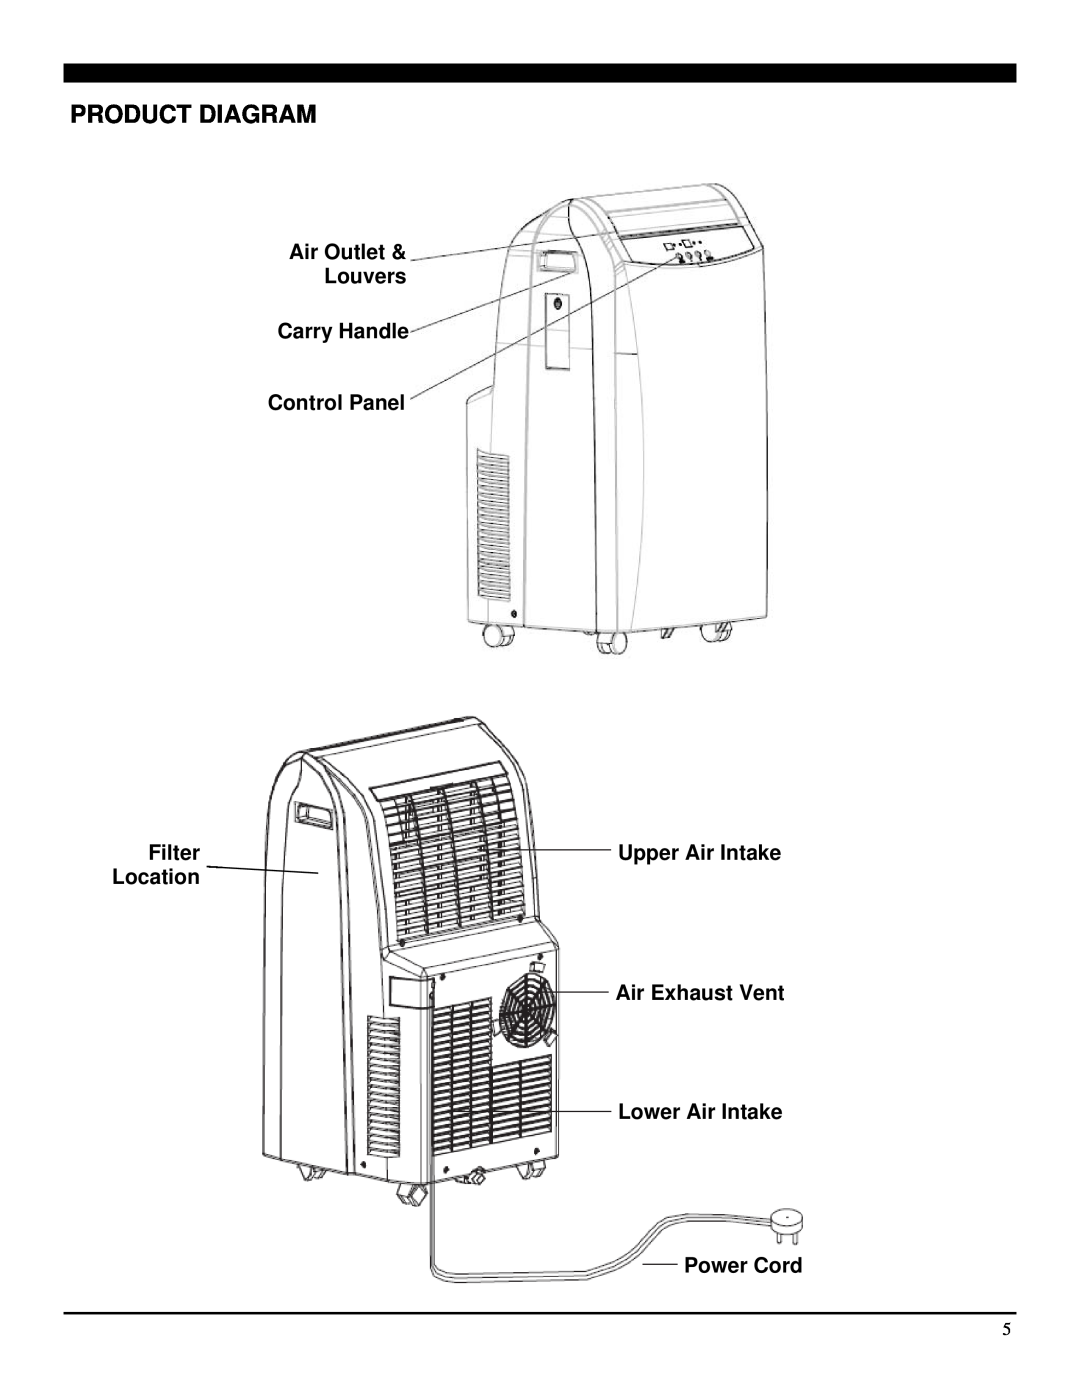 Soleus Air SG-PAC-12E1 manual Product Diagram, Air Outlet & Louvers Carry Handle Control Panel, Filter, Upper Air Intake 